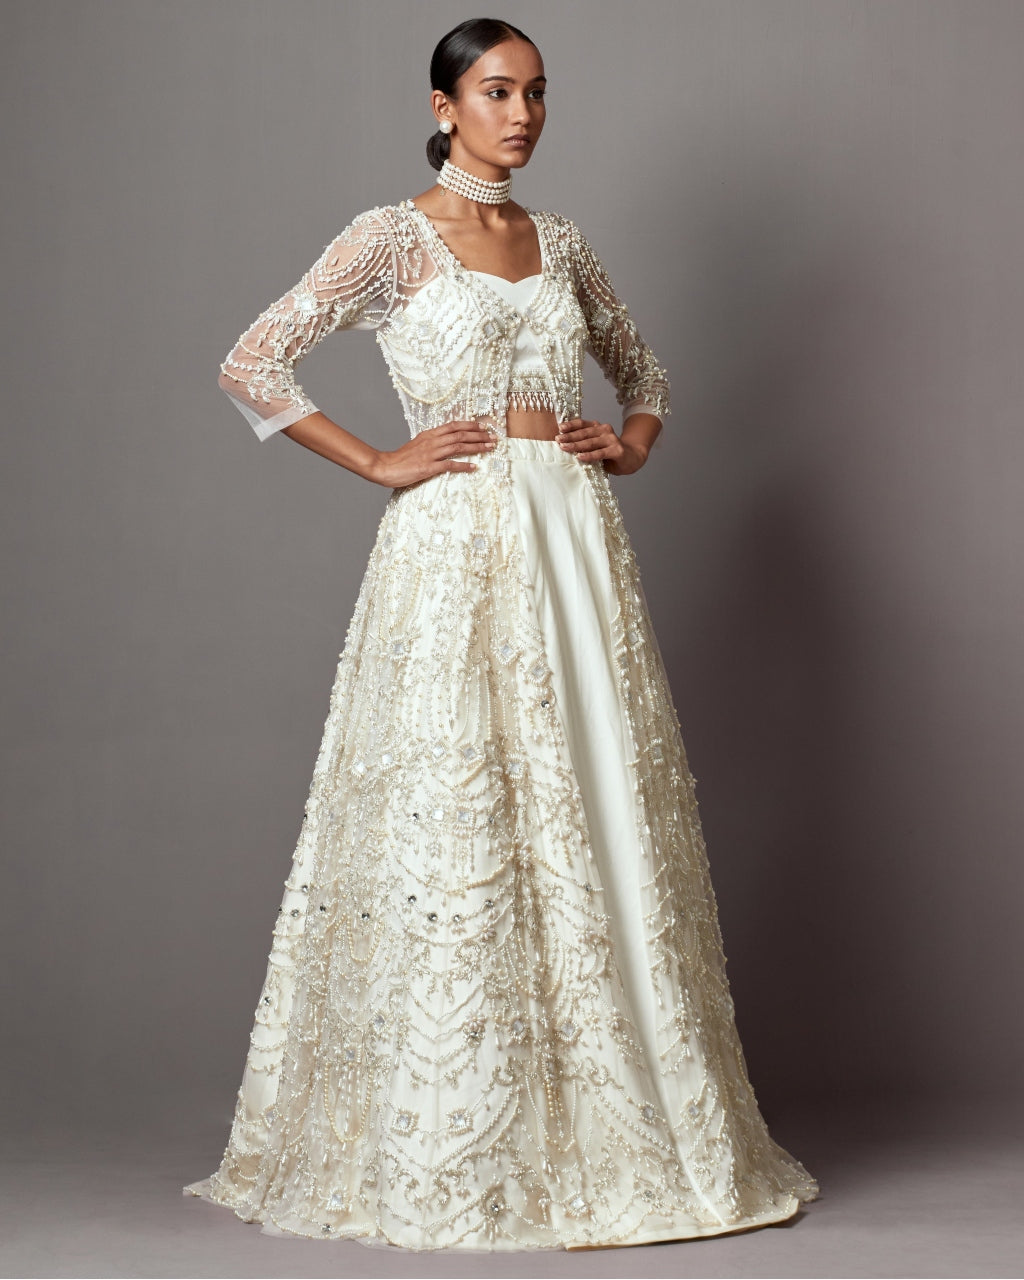 Designer Gowns For Indian Wedding Reception And Cocktail Parties!